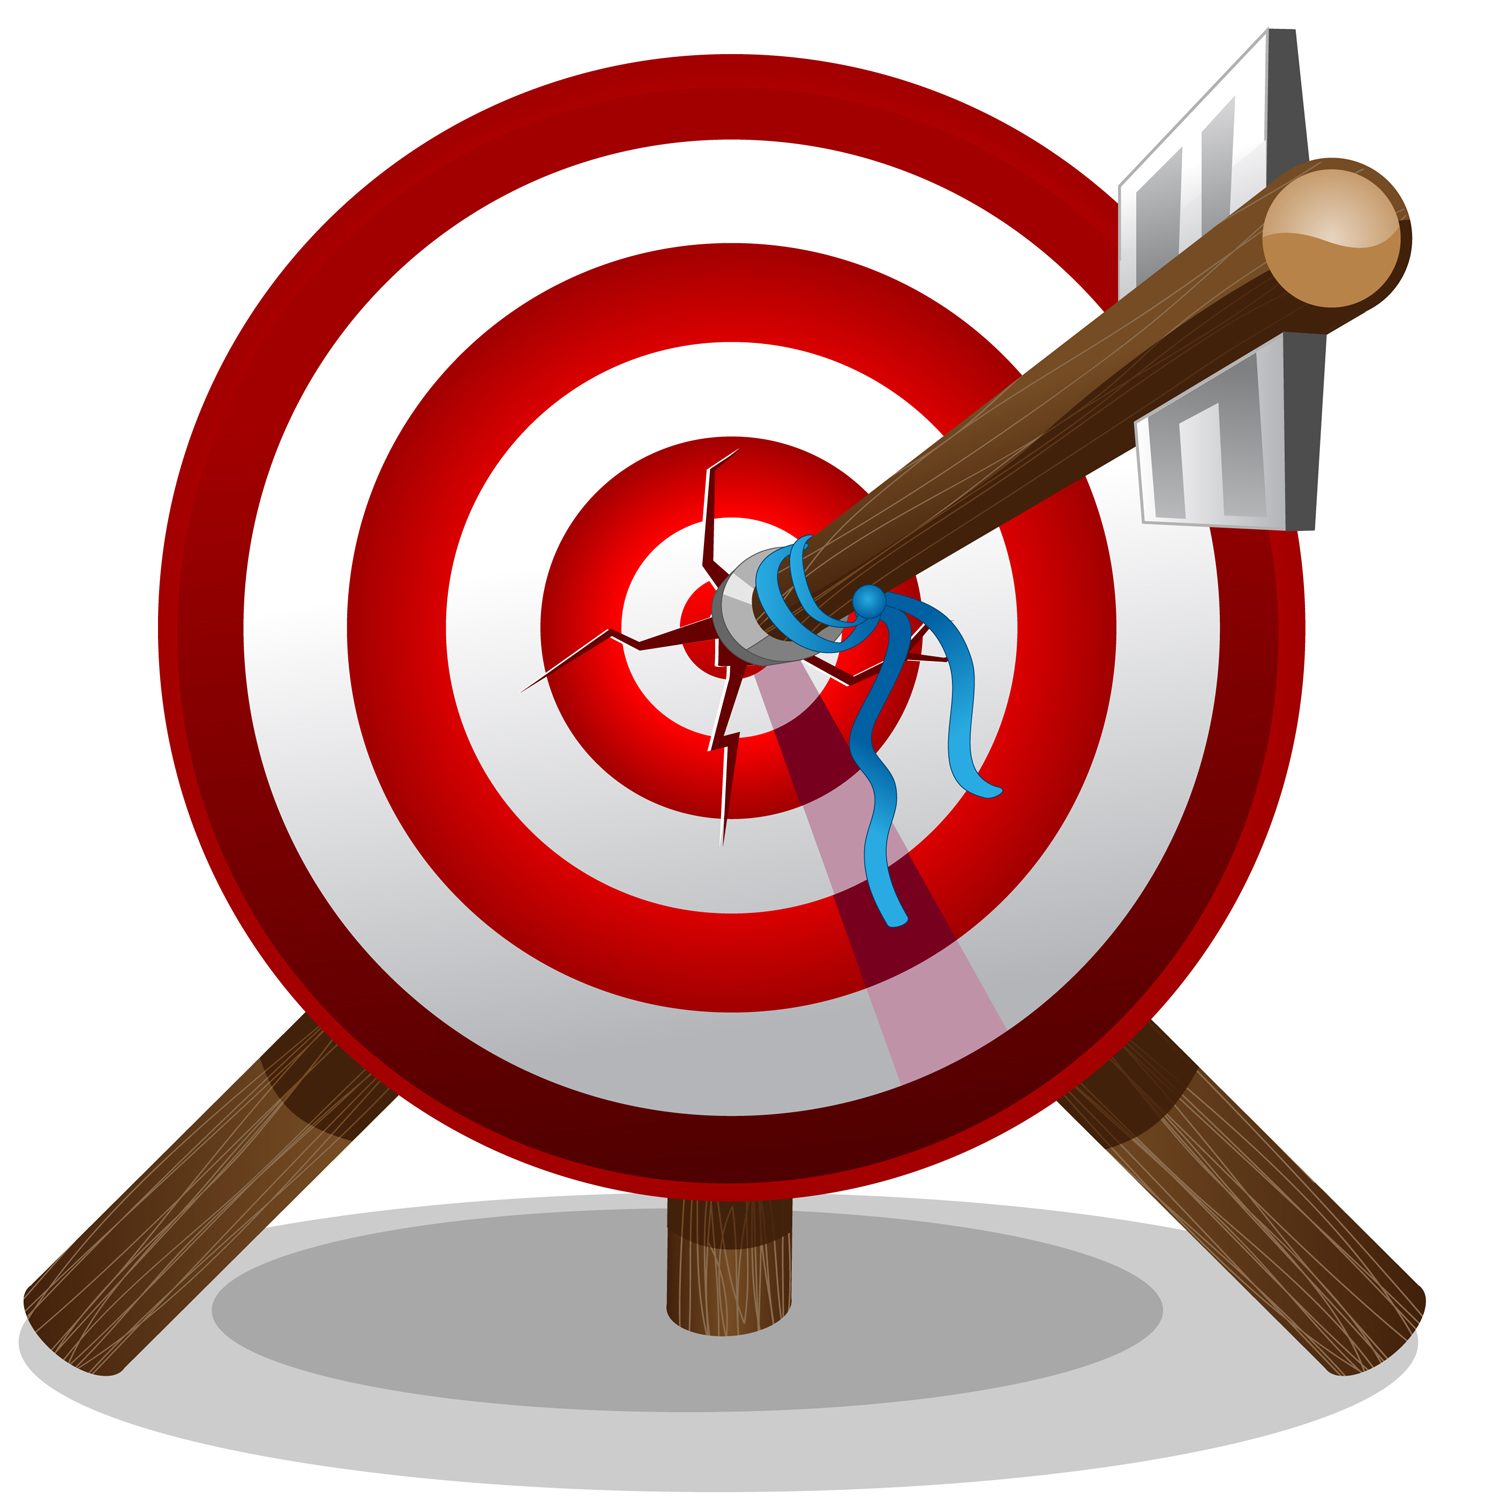 Free Picture Of A Target, Download Free Picture Of A Target png images